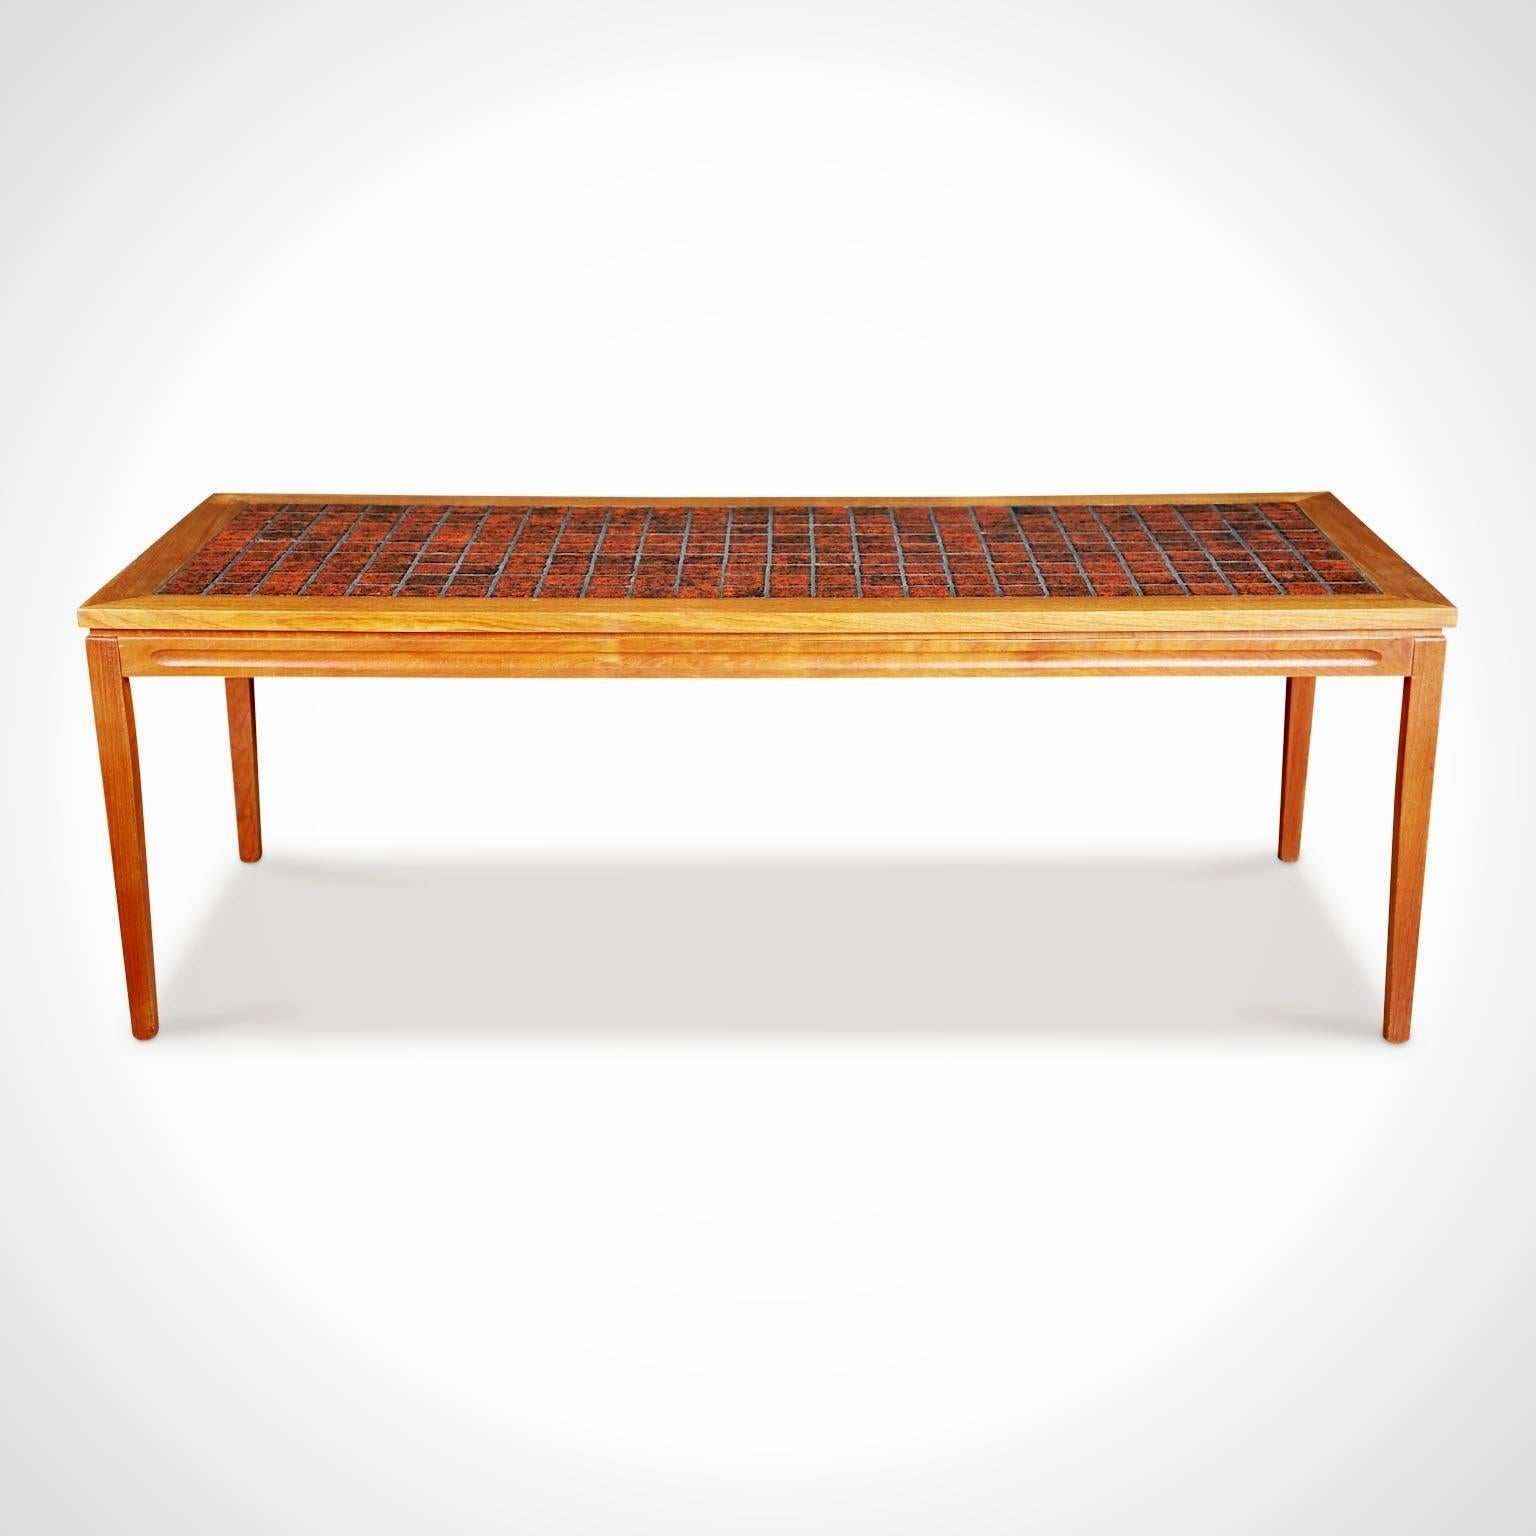 Danish midcentury teak coffee table, circa 1960 in the style of David Rosen for Nordiska Kompaniet. Featuring a rectangular top decorated with rust colored ceramic tiles of varying shades in a uniform pattern that are punctuated with flecks of